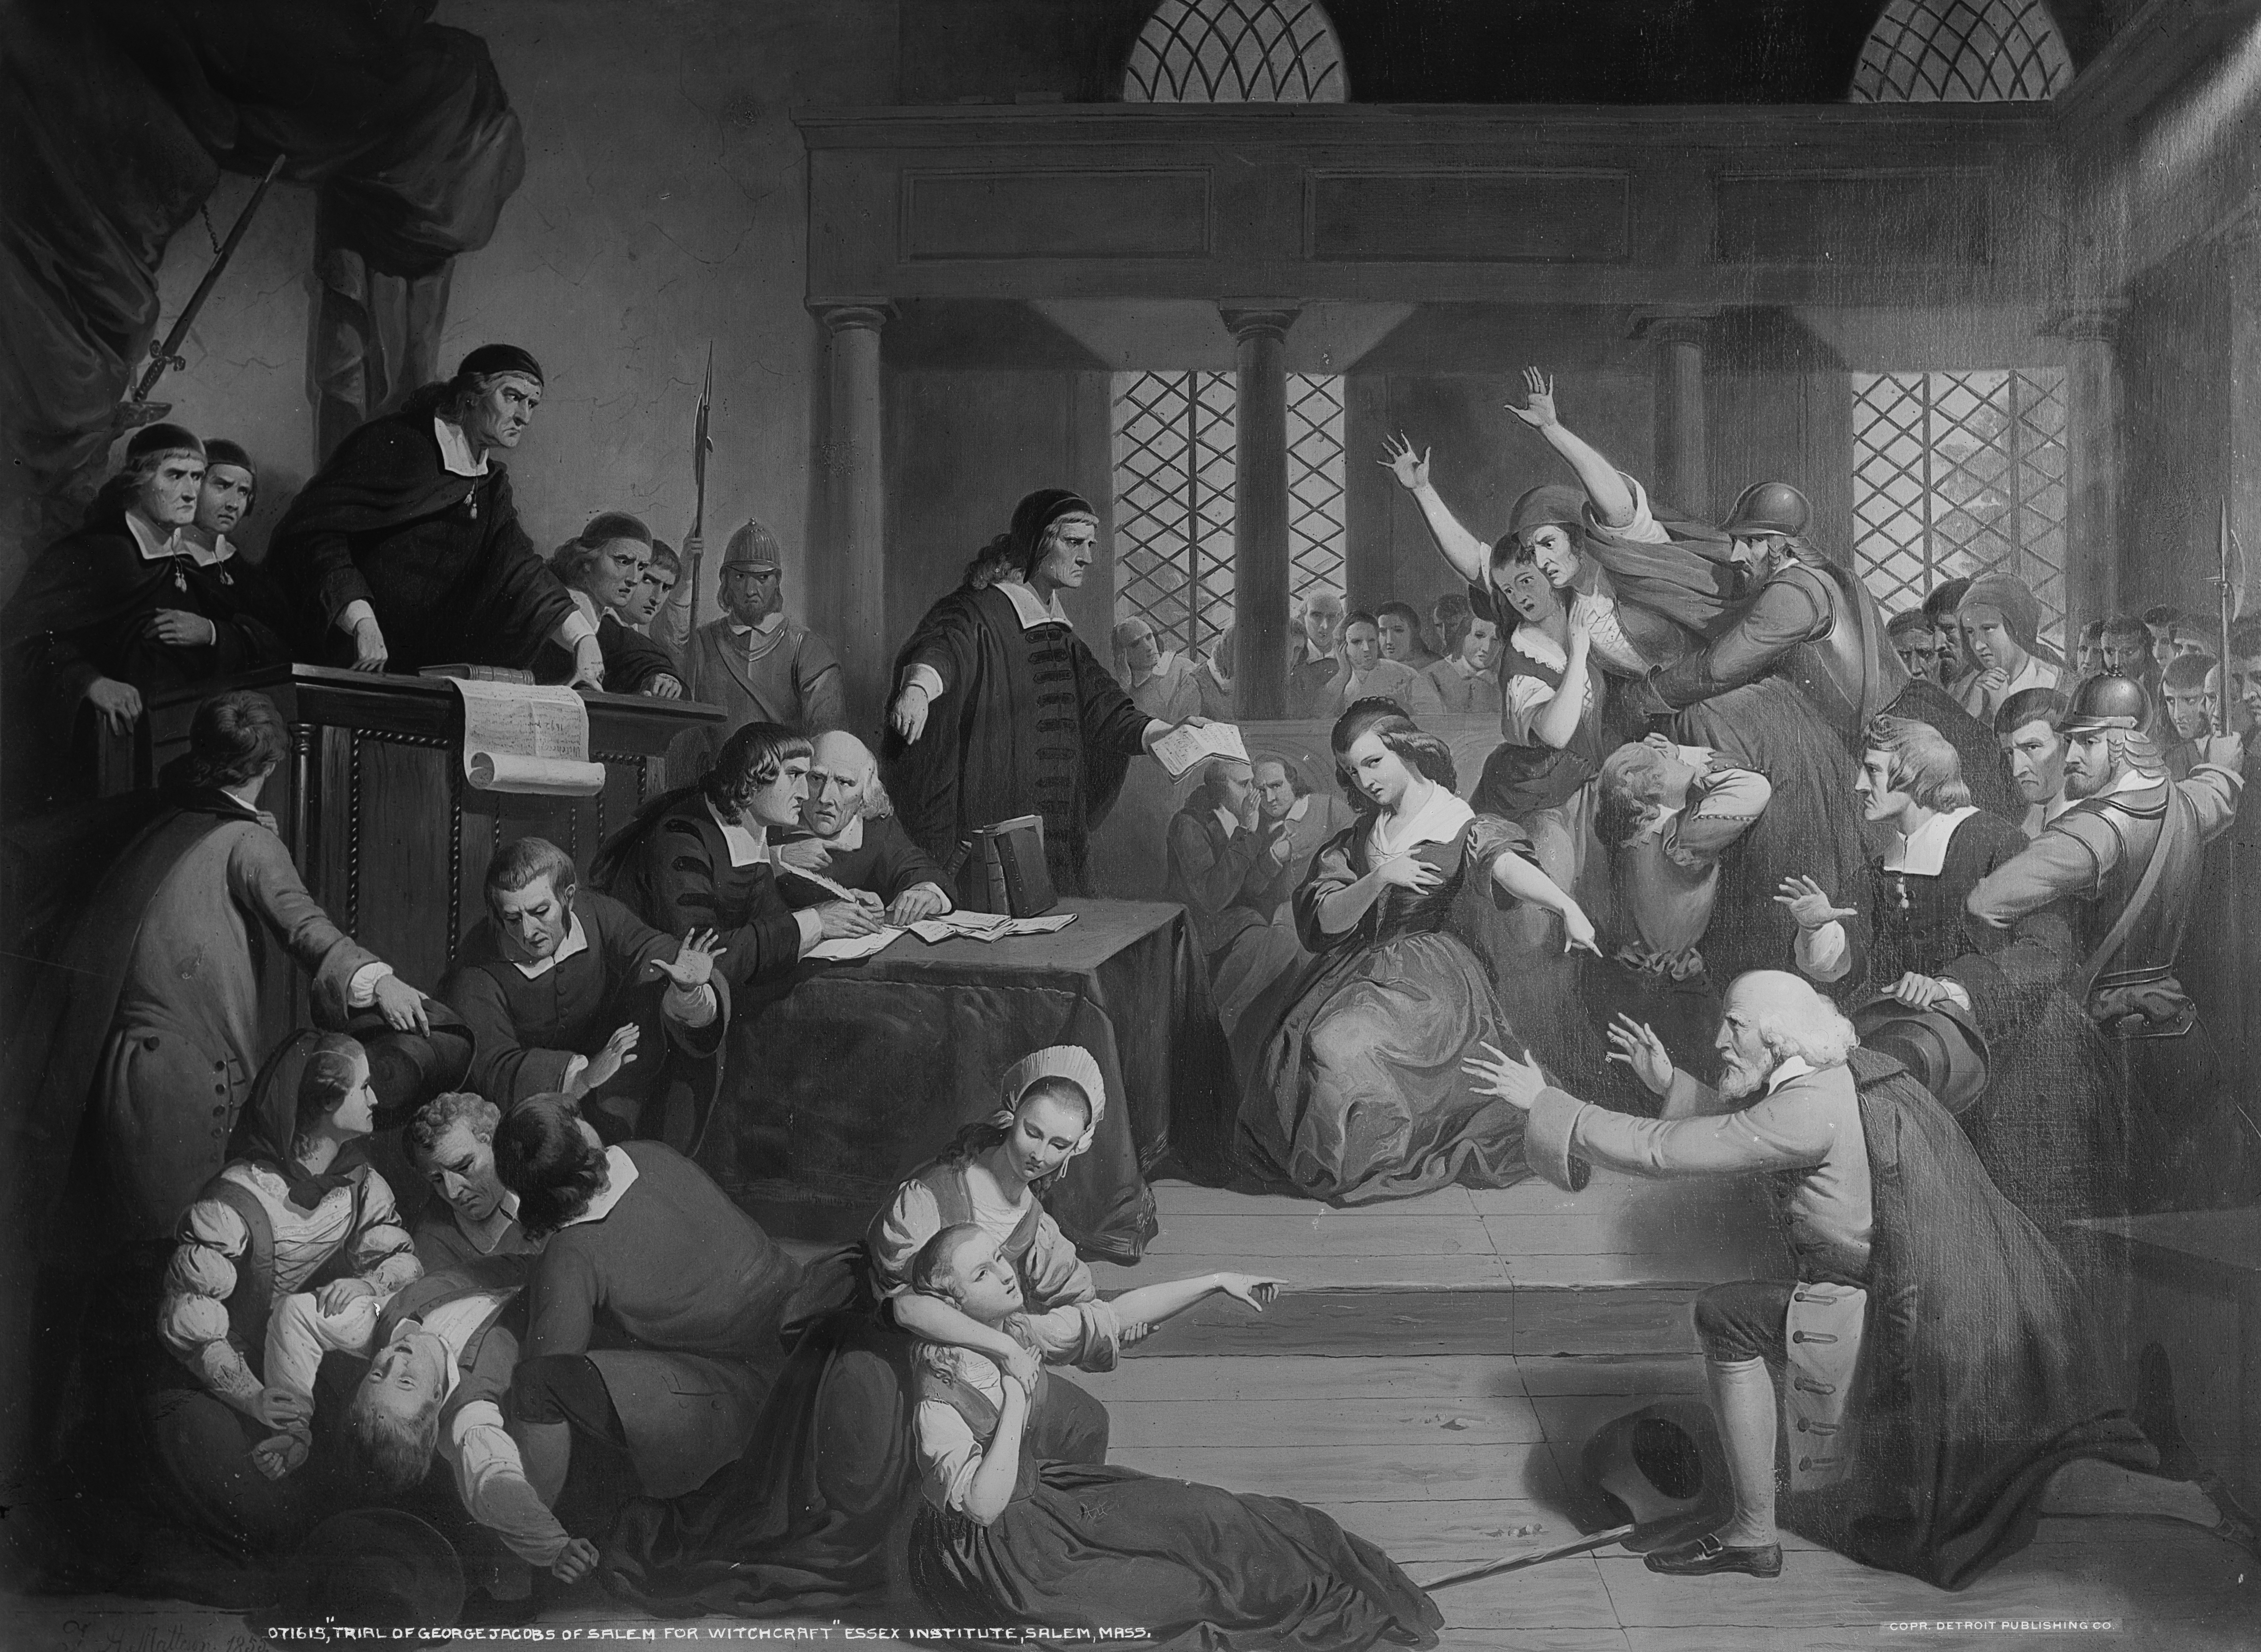 This image provided by the Library of Congress shows the painting "Trial of George Jacobs of Salem ...